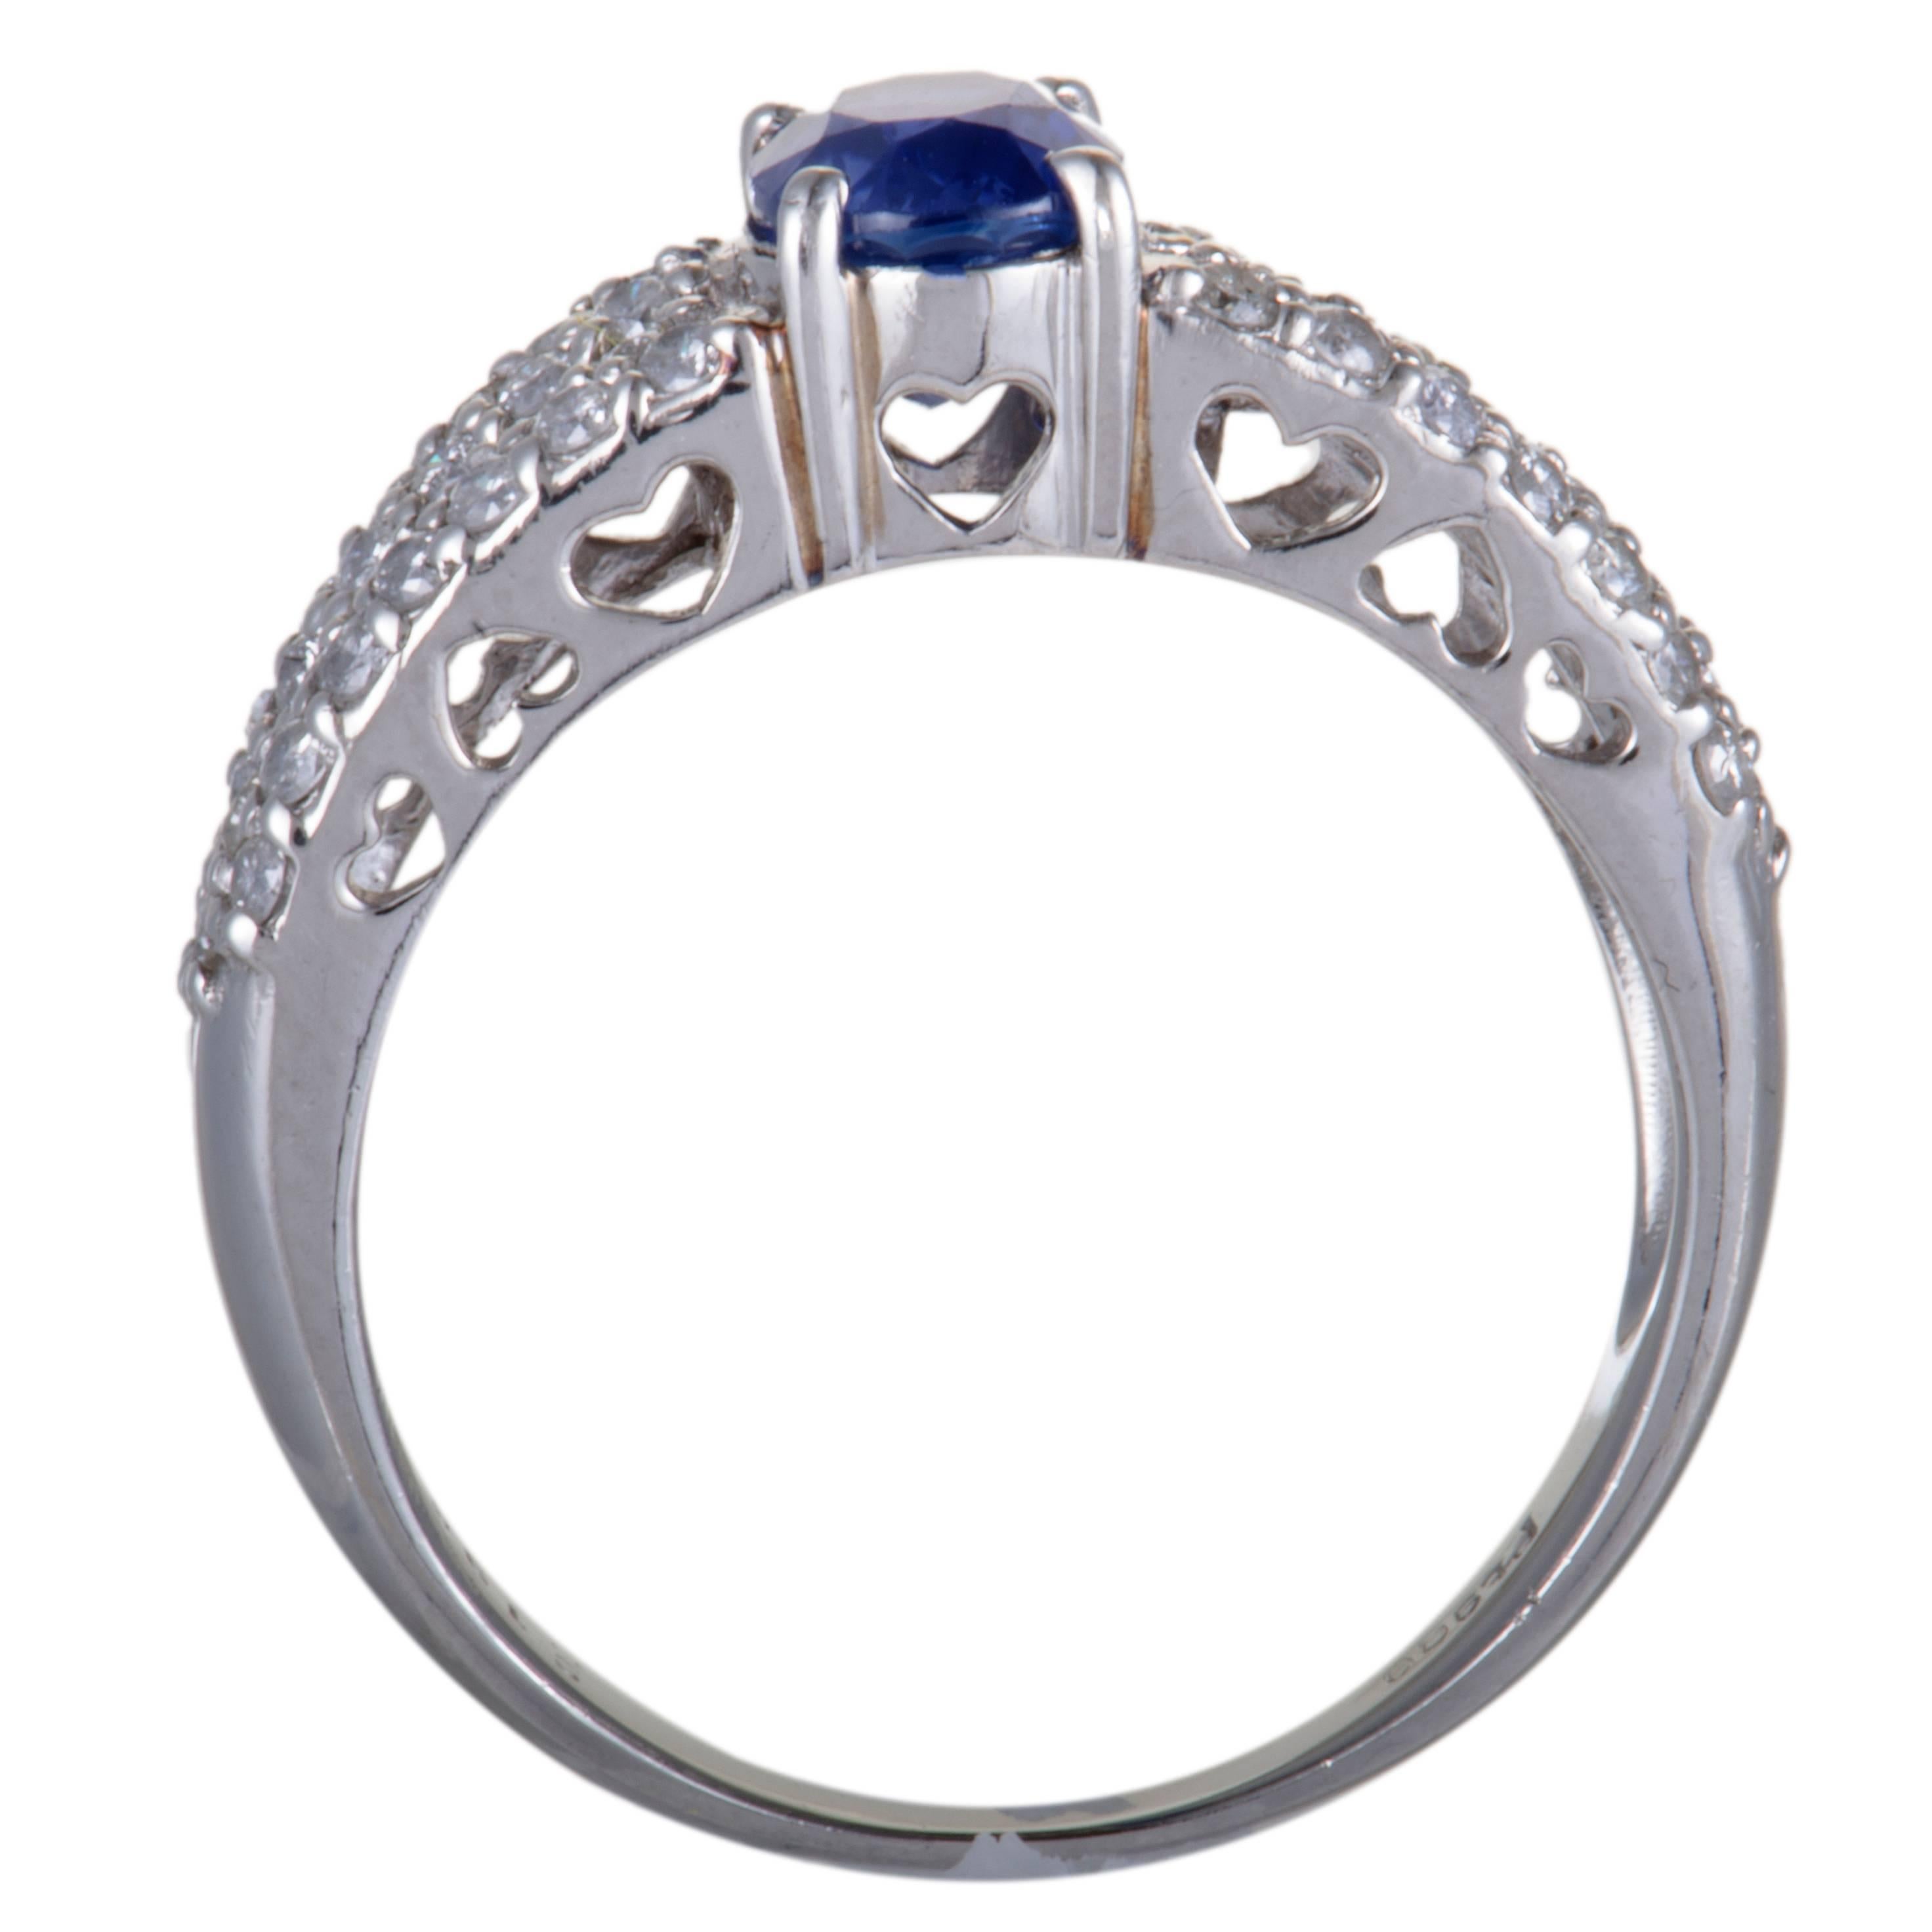 This mesmerizing ring features a classic design and compels with its luxurious décor. The fabulous ring is made of classy platinum and adorned in a sparkling pave of 0.57ct diamonds with a captivating blue sapphire in the center, weighing